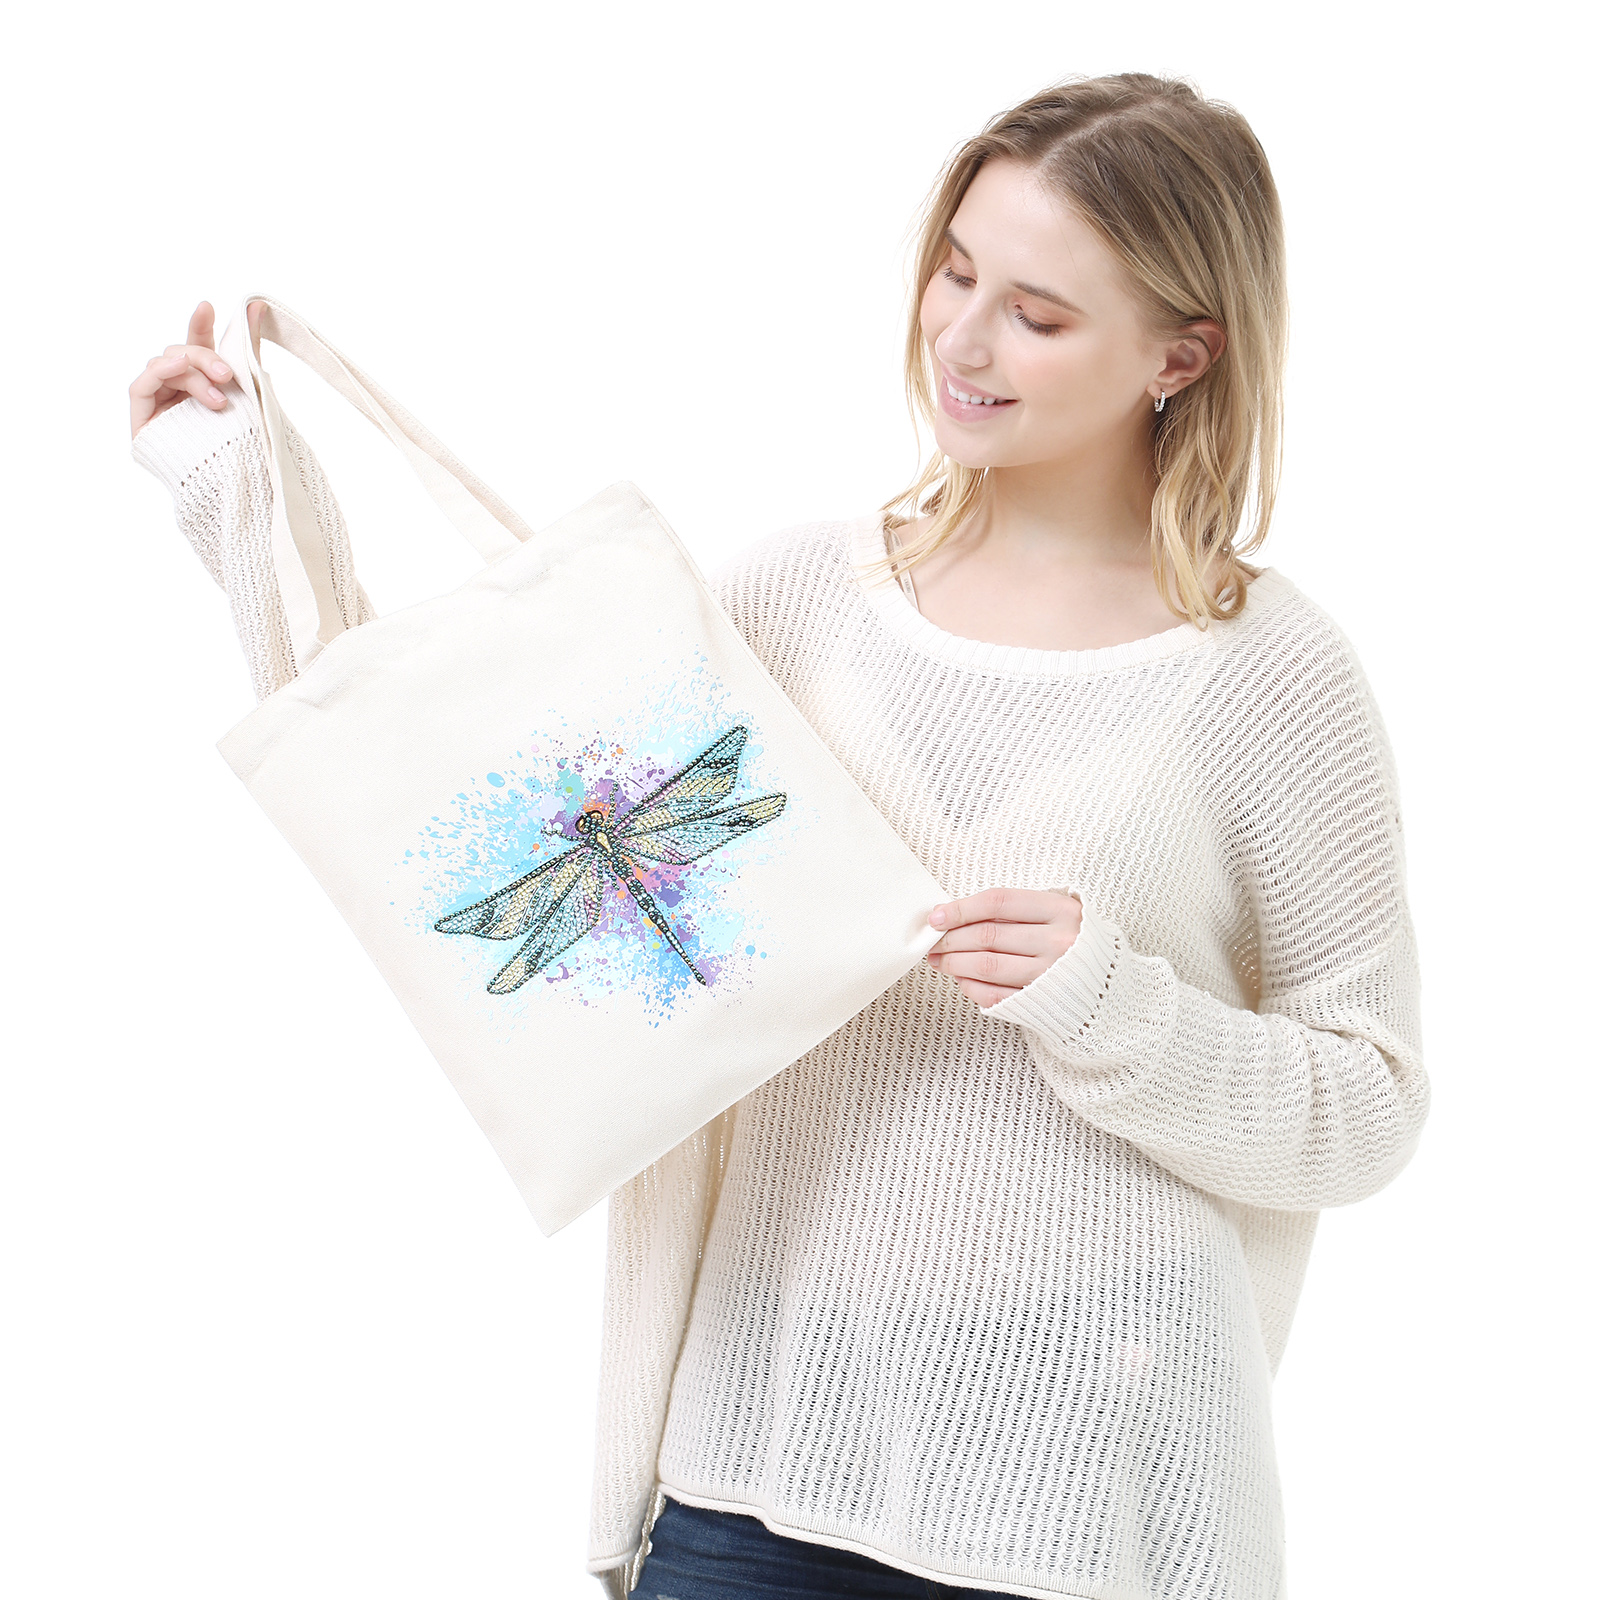 5D DIY Diamond Painting Art Bags, Reusable Grocery Handbag for Beginners, Woman Home Storage Bag, Durable Fashionable Tote Bags for Shopping Daily